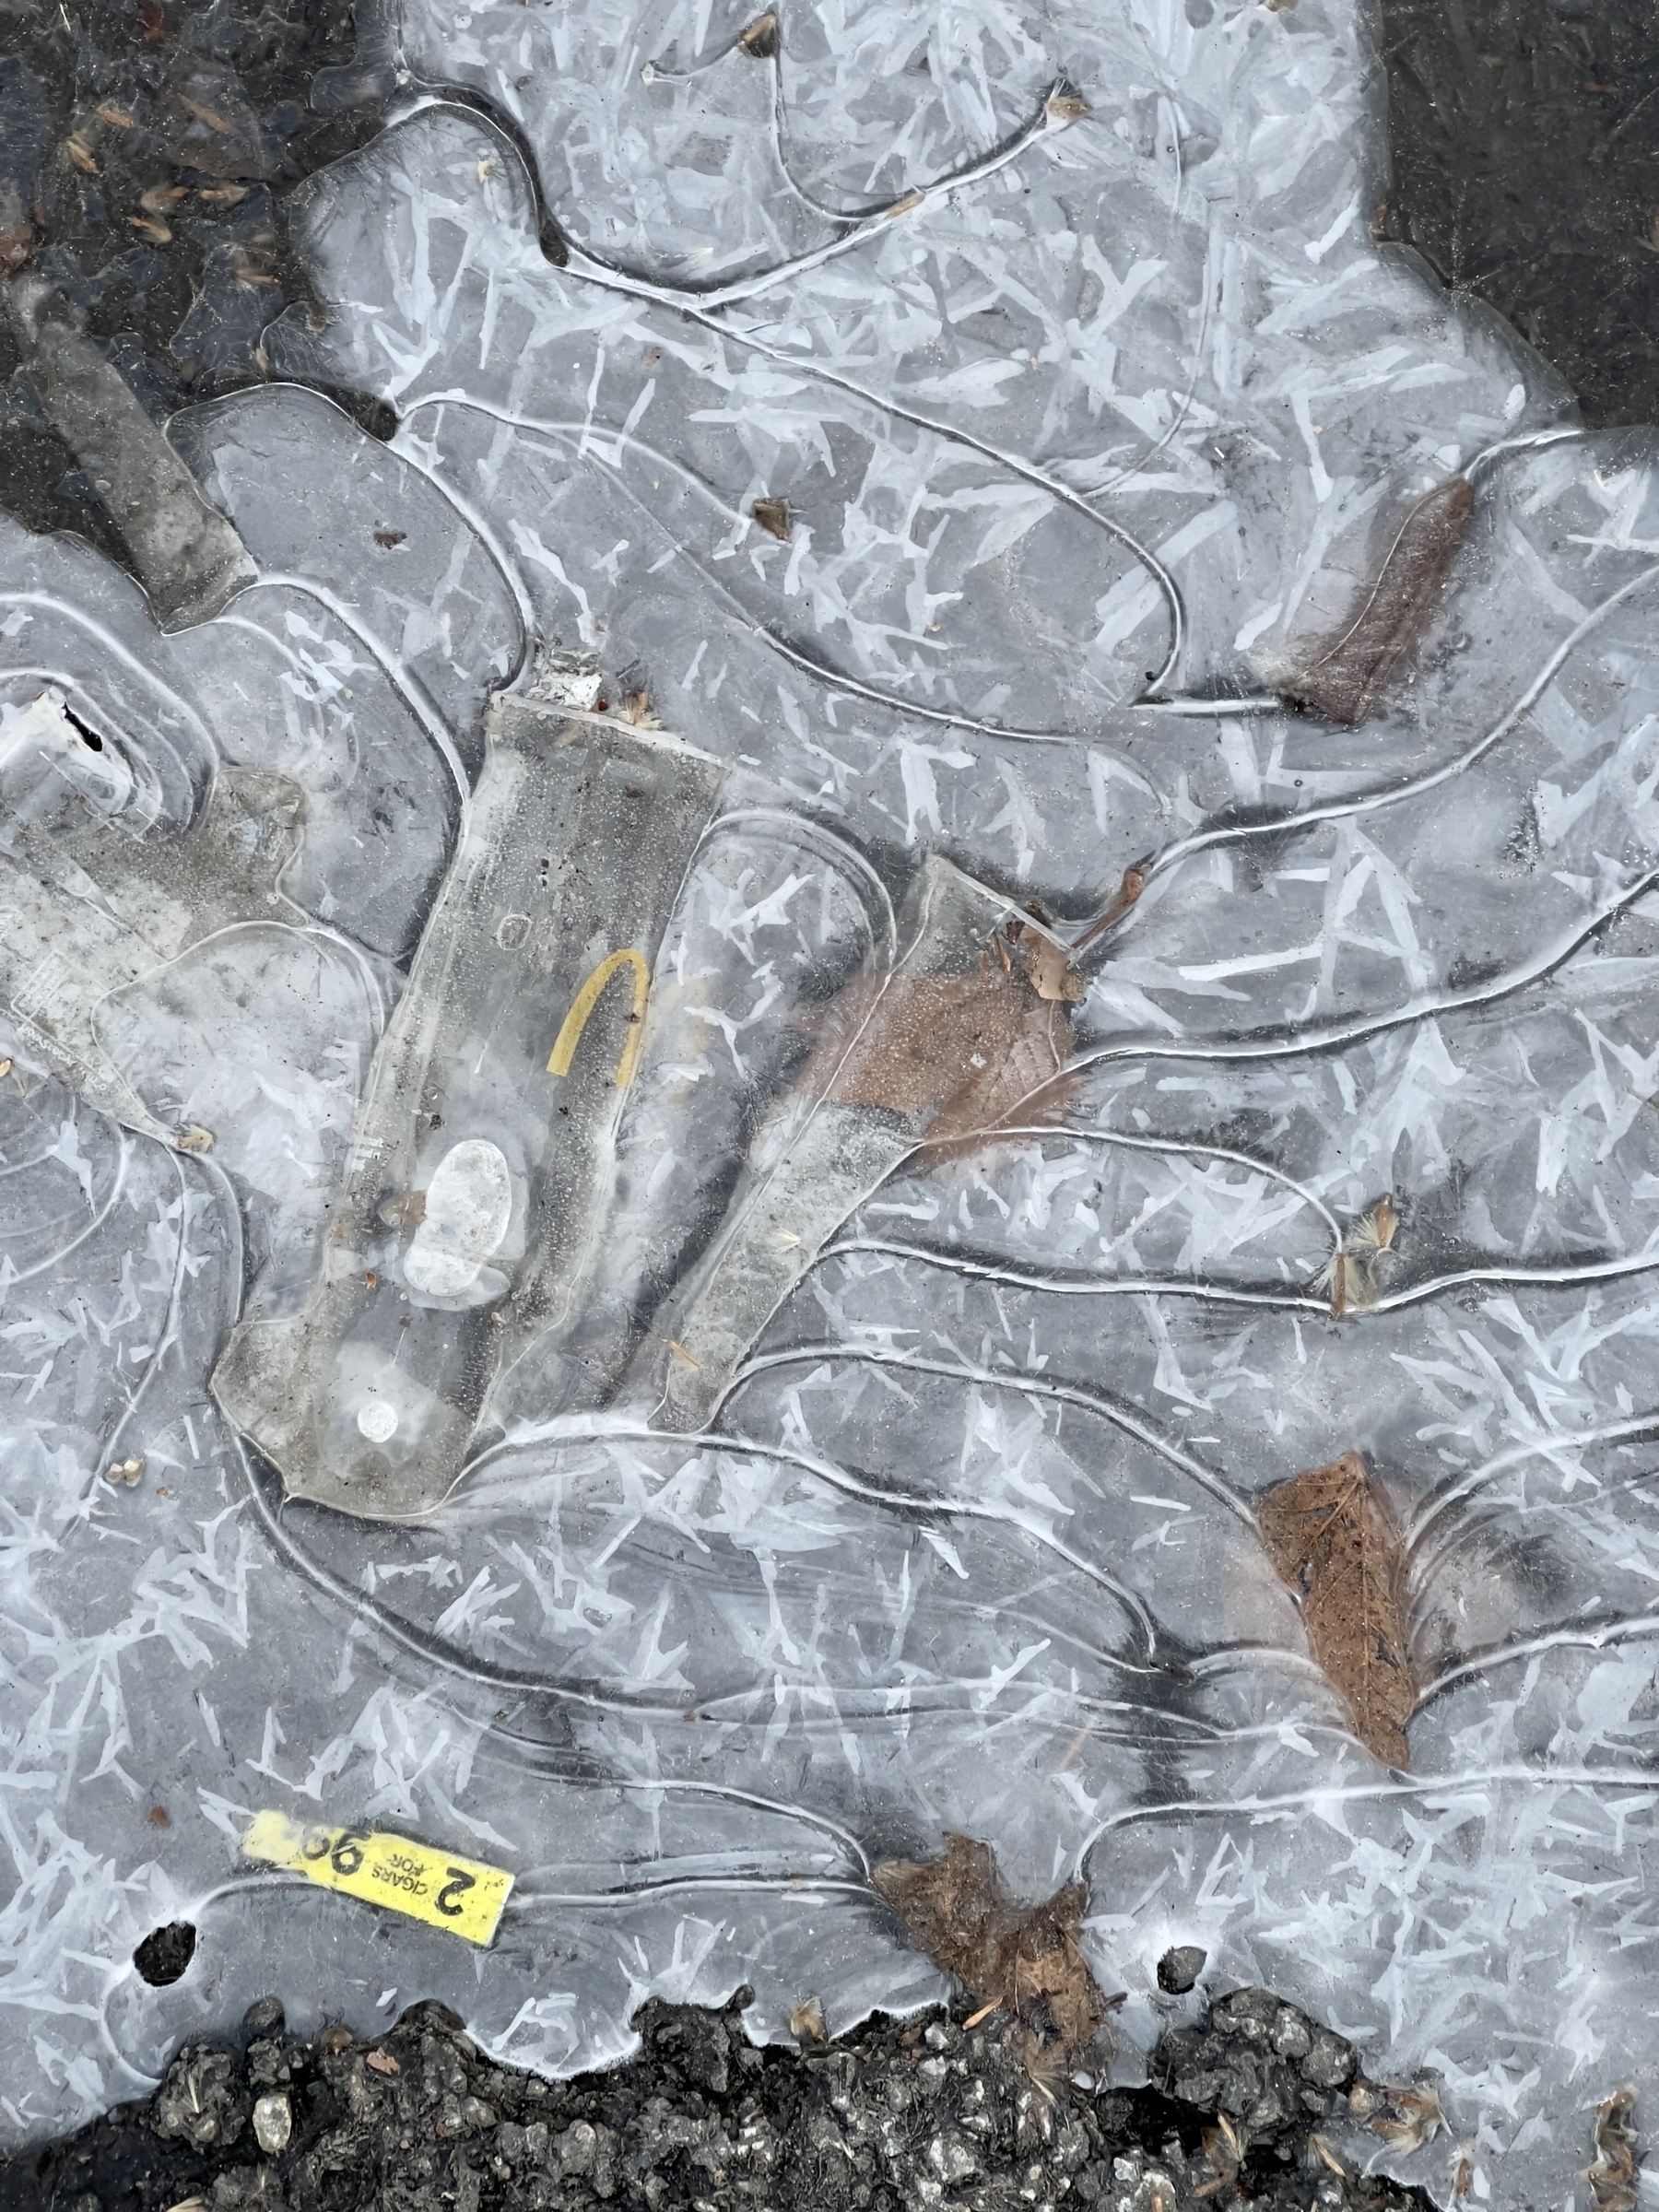 Closeup of ice patch with McDonald’s cup and price tag imbedded.